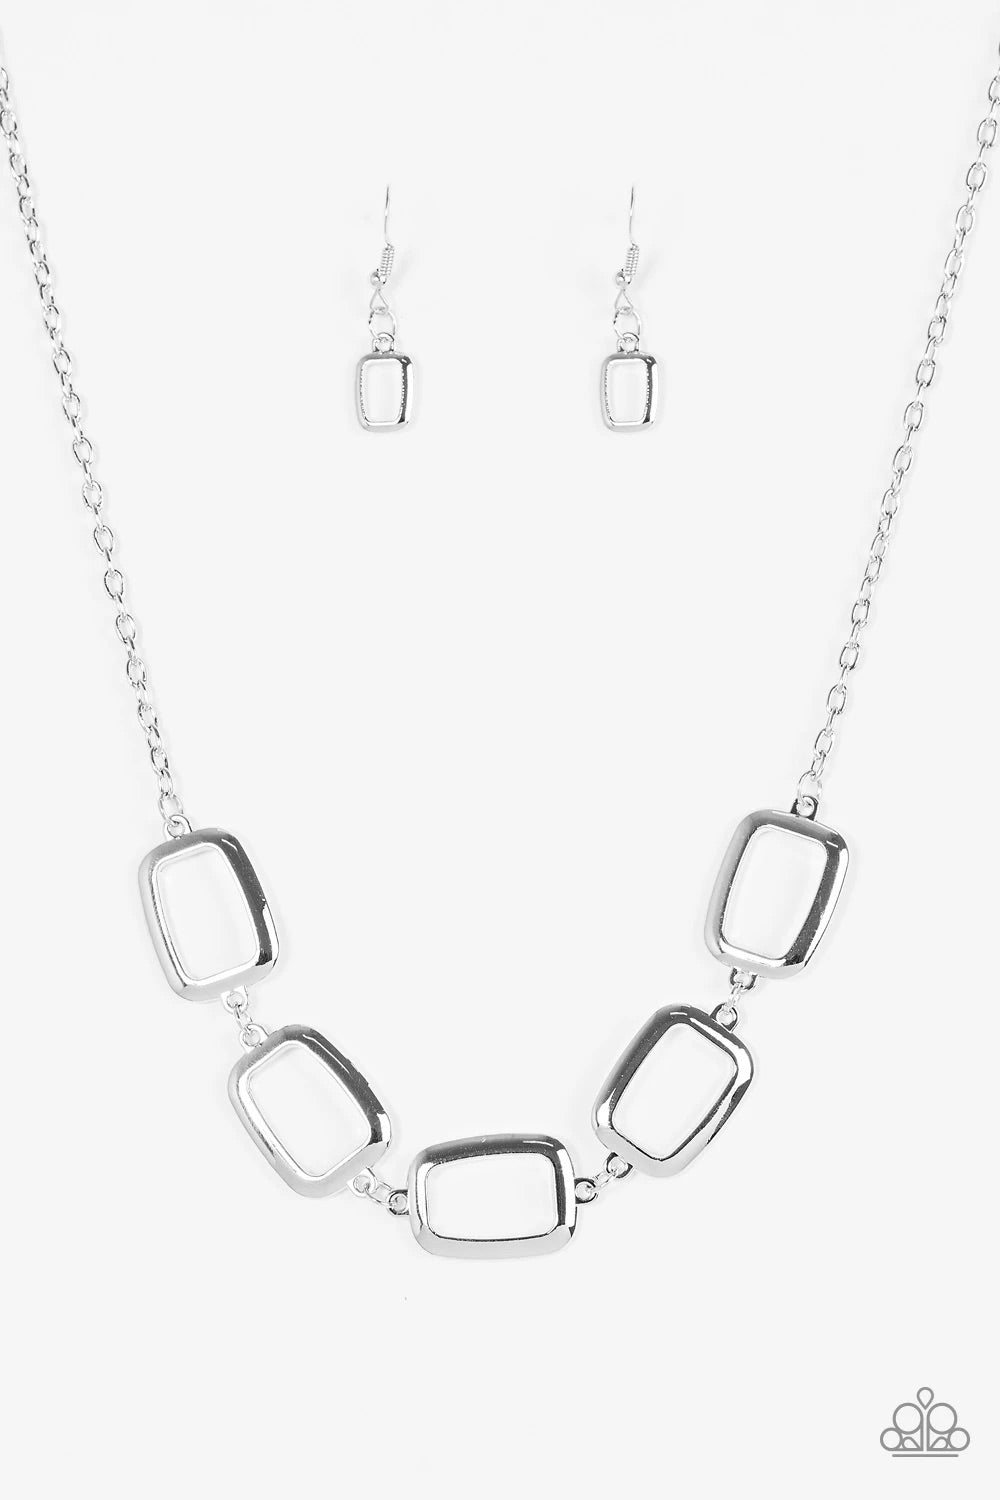 Paparazzi Accessories  - Gorgeously Geometric #N467 Box 5 - Silver Necklace